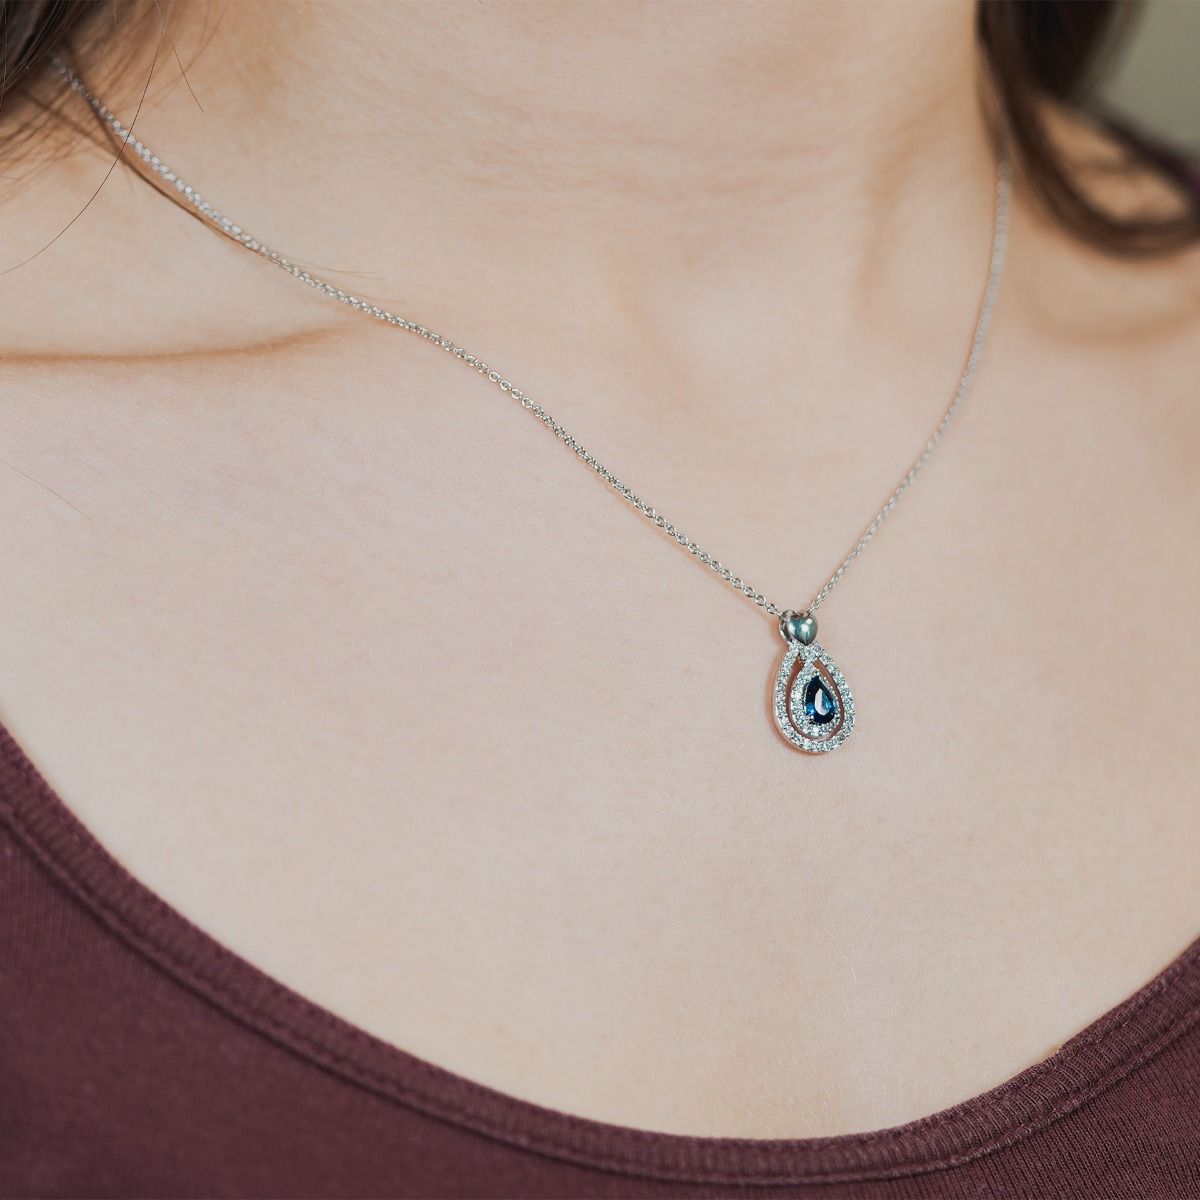 Discover elegance with our Sapphire Heart Pear-Drop Pendant. Enhanced by twin cubic zirconia pear-drop bands, it features a polished heart on the bale. The enchanting focal point is a captivating sapphire stone.